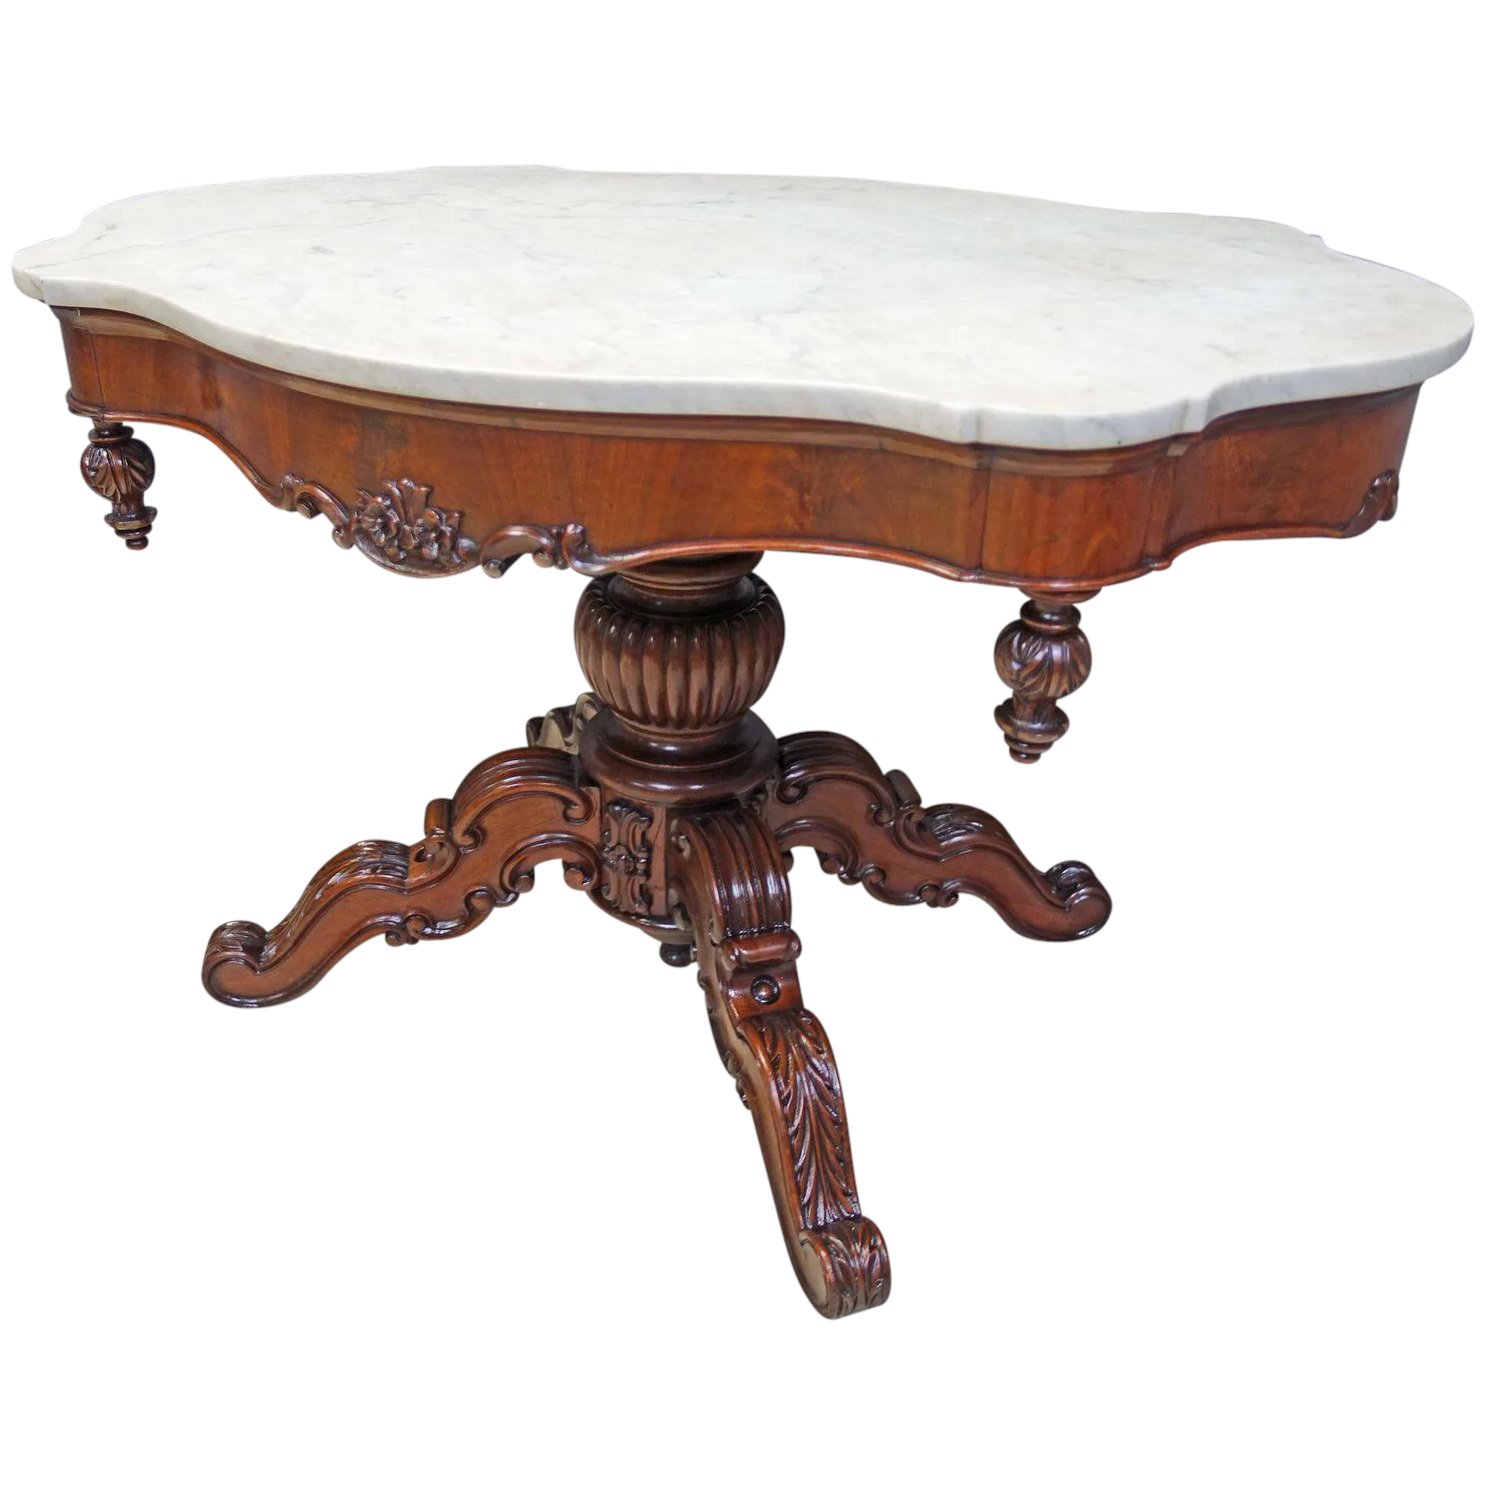 https://atrouche.com/wp-content/uploads/2022/03/Victorian-Marble-Top-Table.jpg